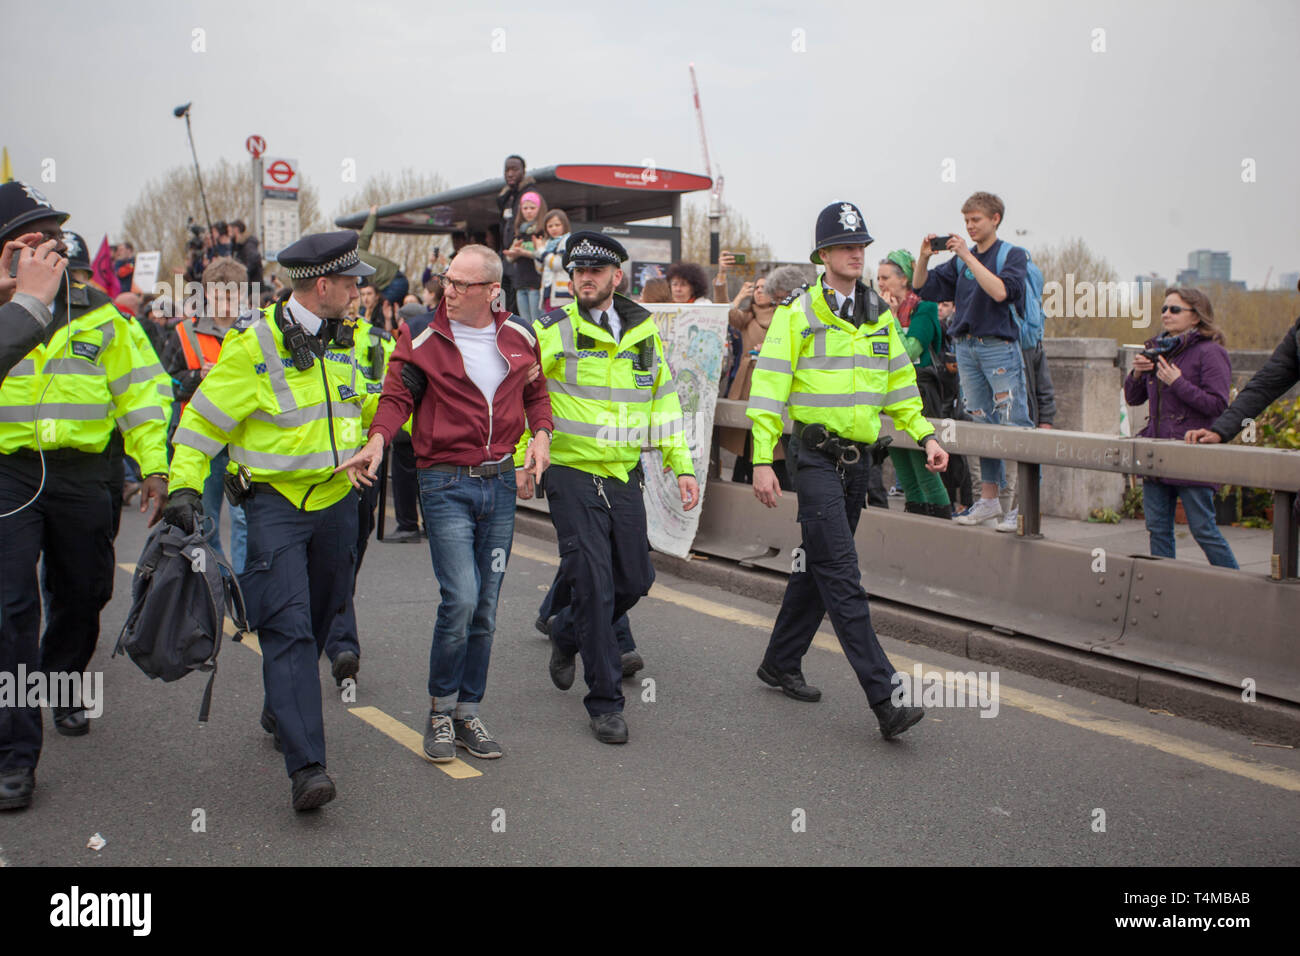 16th April 2019: Excitation Rebellion: Protester getting lead away in handcuffs by a Met Police Officer on Waterloo Bridge, London.UK Stock Photo